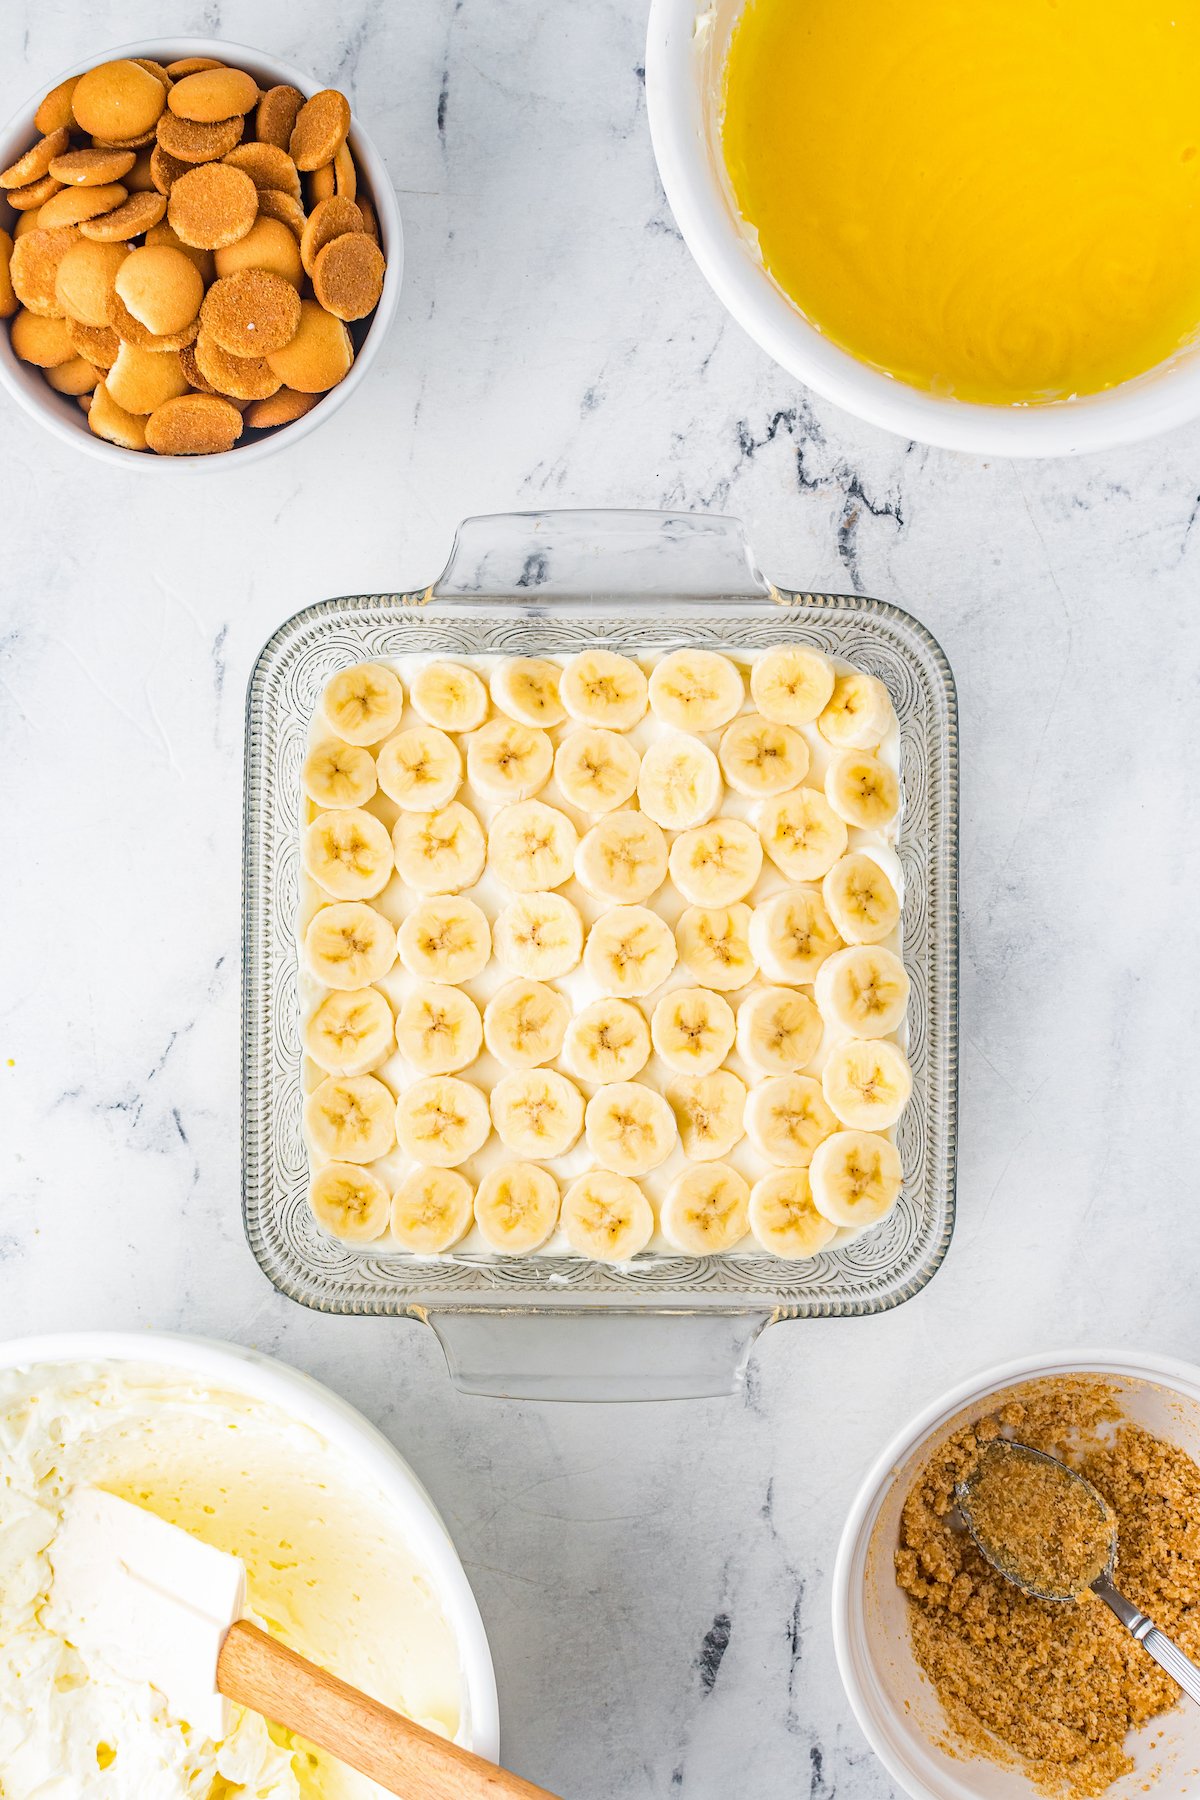 Overhead shot of a glass baking dish with a layer of bananas and cream cheese filling.